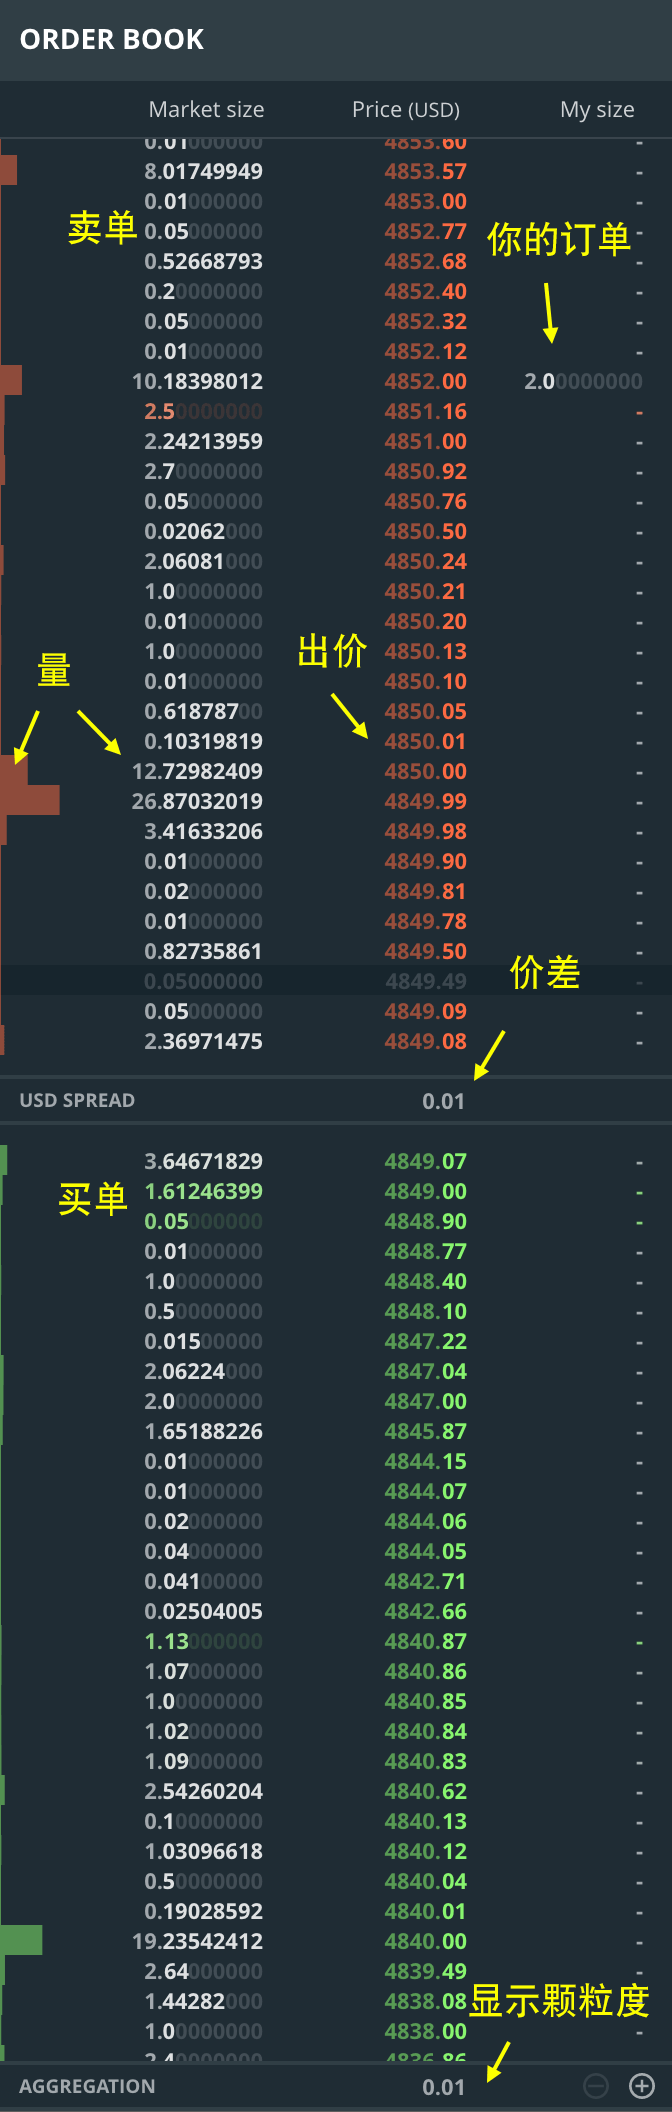 a12-orderbook.png